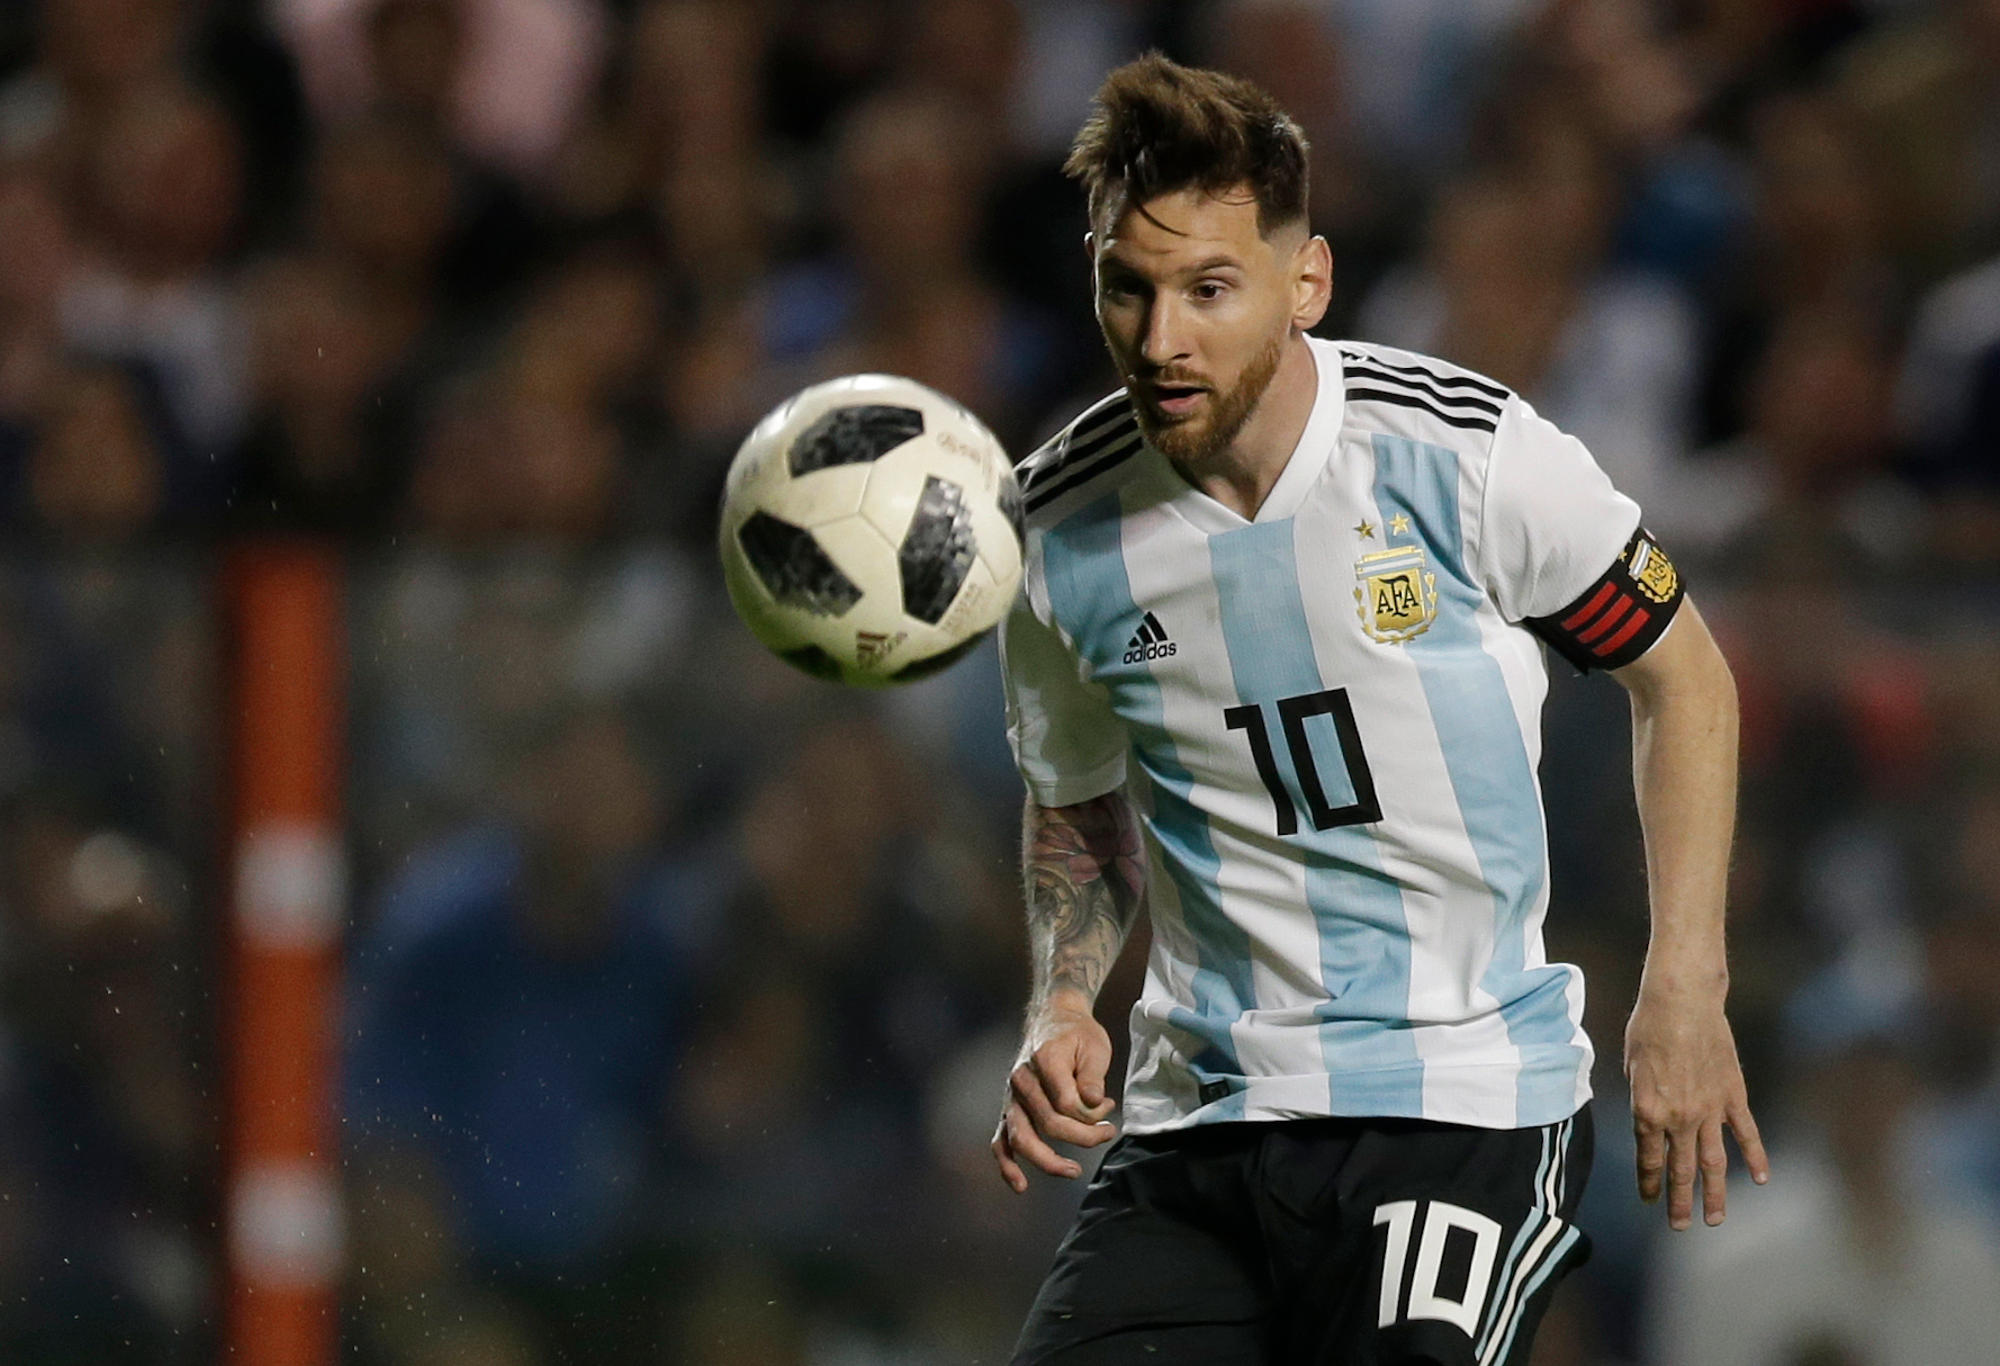 Argentina's Lionel Messi controls the ball during a friendly soccer match between Argentina and Haiti at the Bombonera stadium in Buenos Aires, Argentina, Tuesday, May 29, 2018.